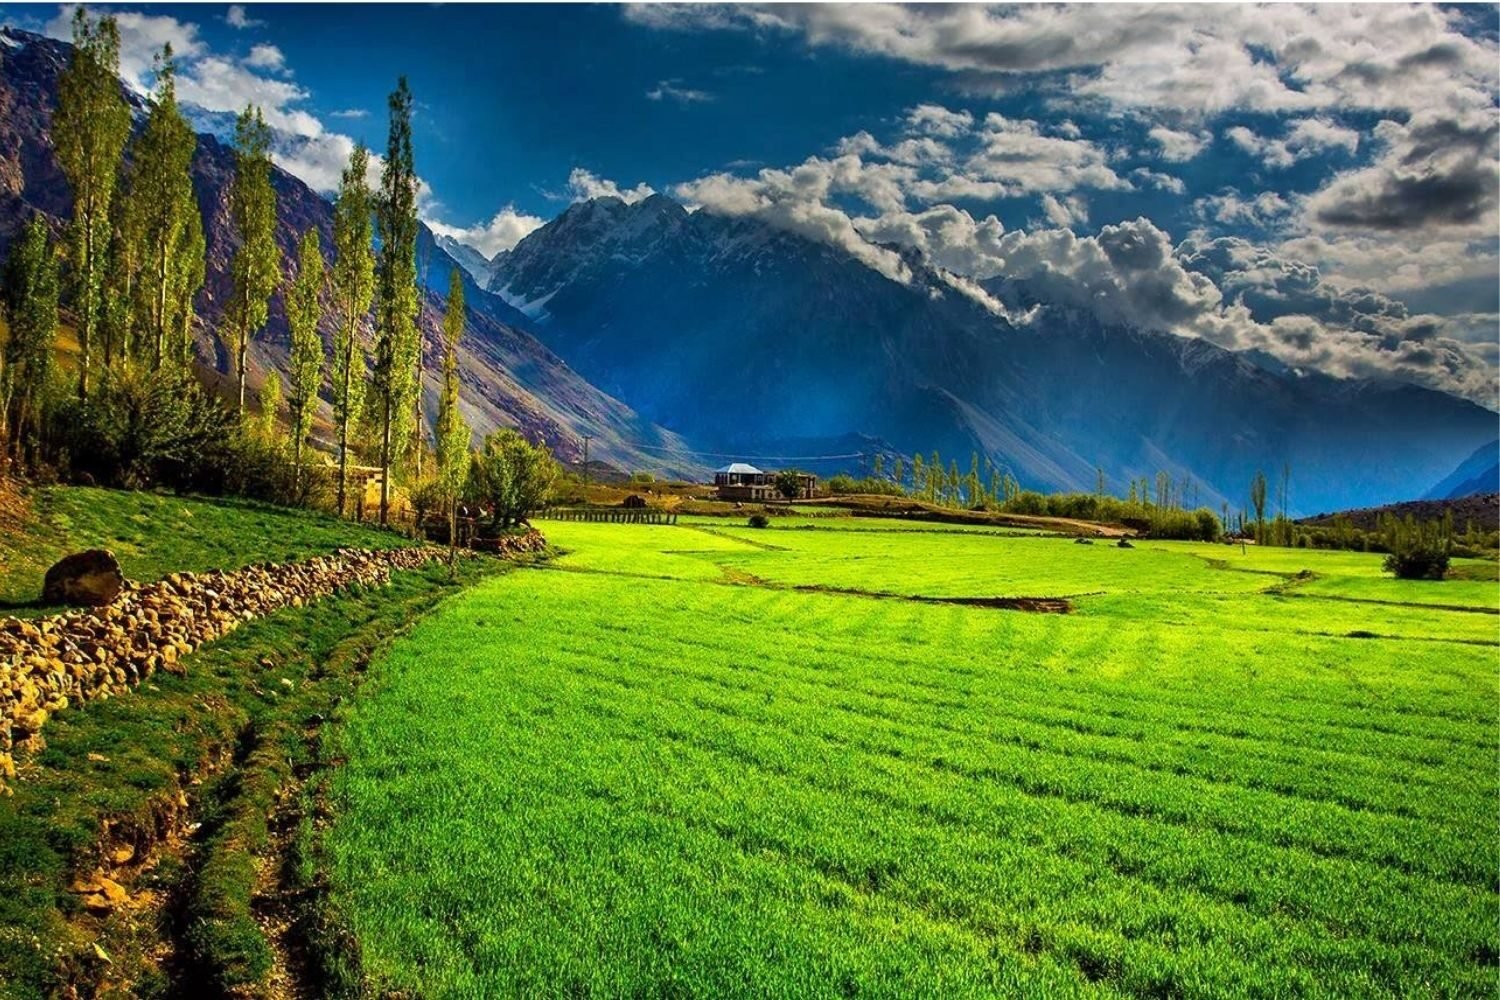 trip-to-hunza-and-hopper-valleys-road-trip-6-days-5-nights-1500x1000 (2)